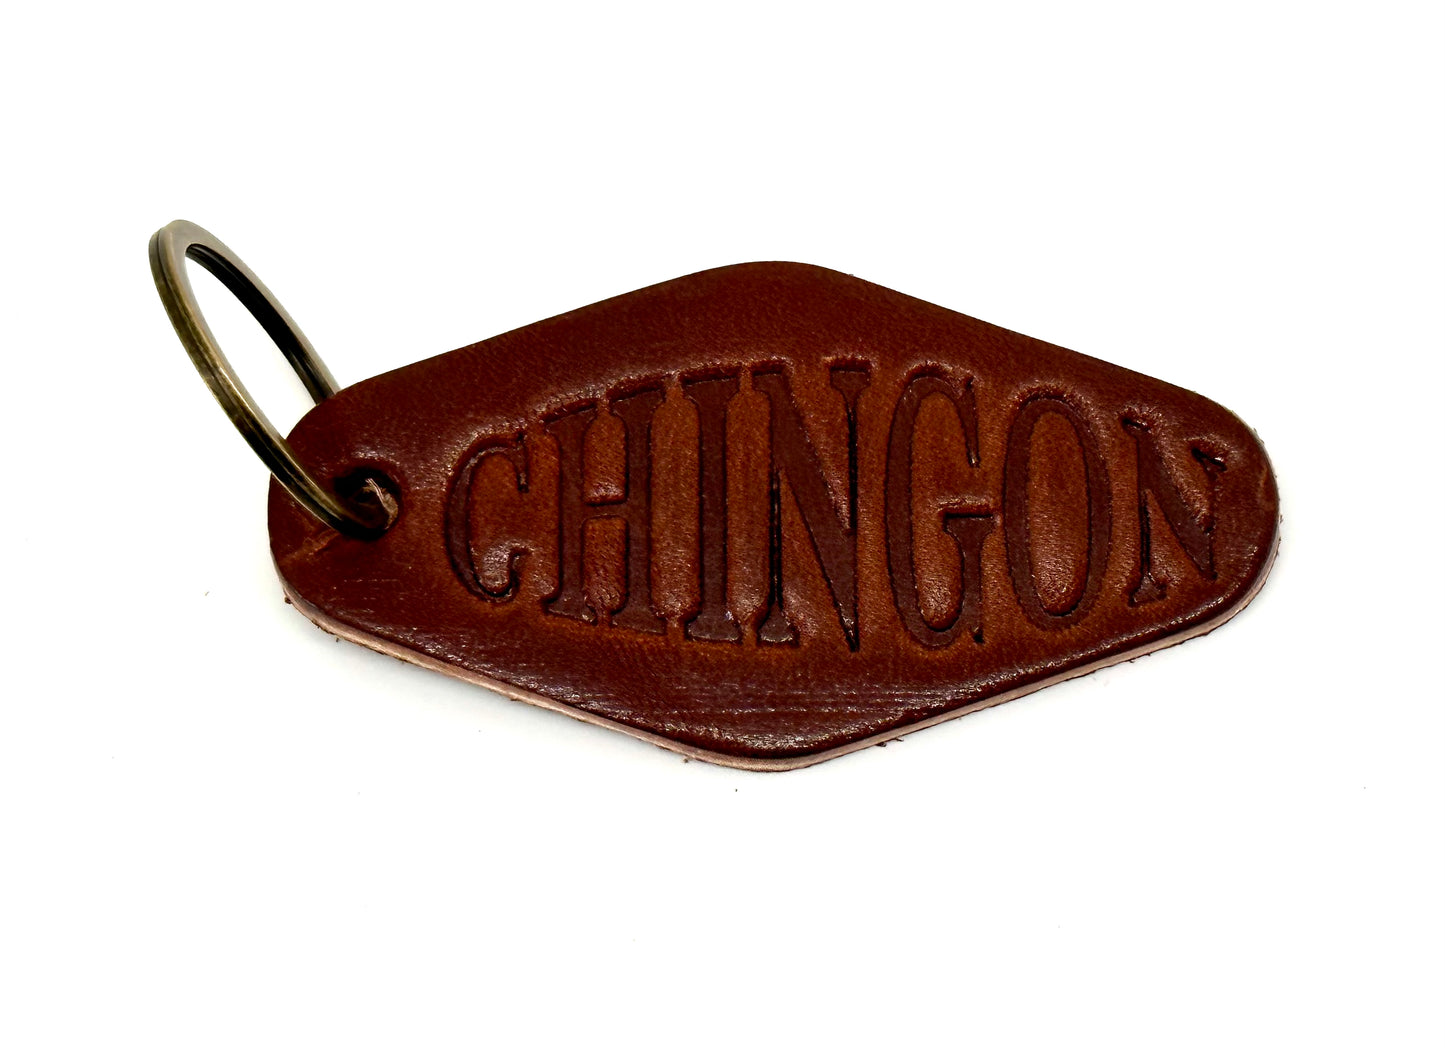 Our Motel Keychain - Chingon